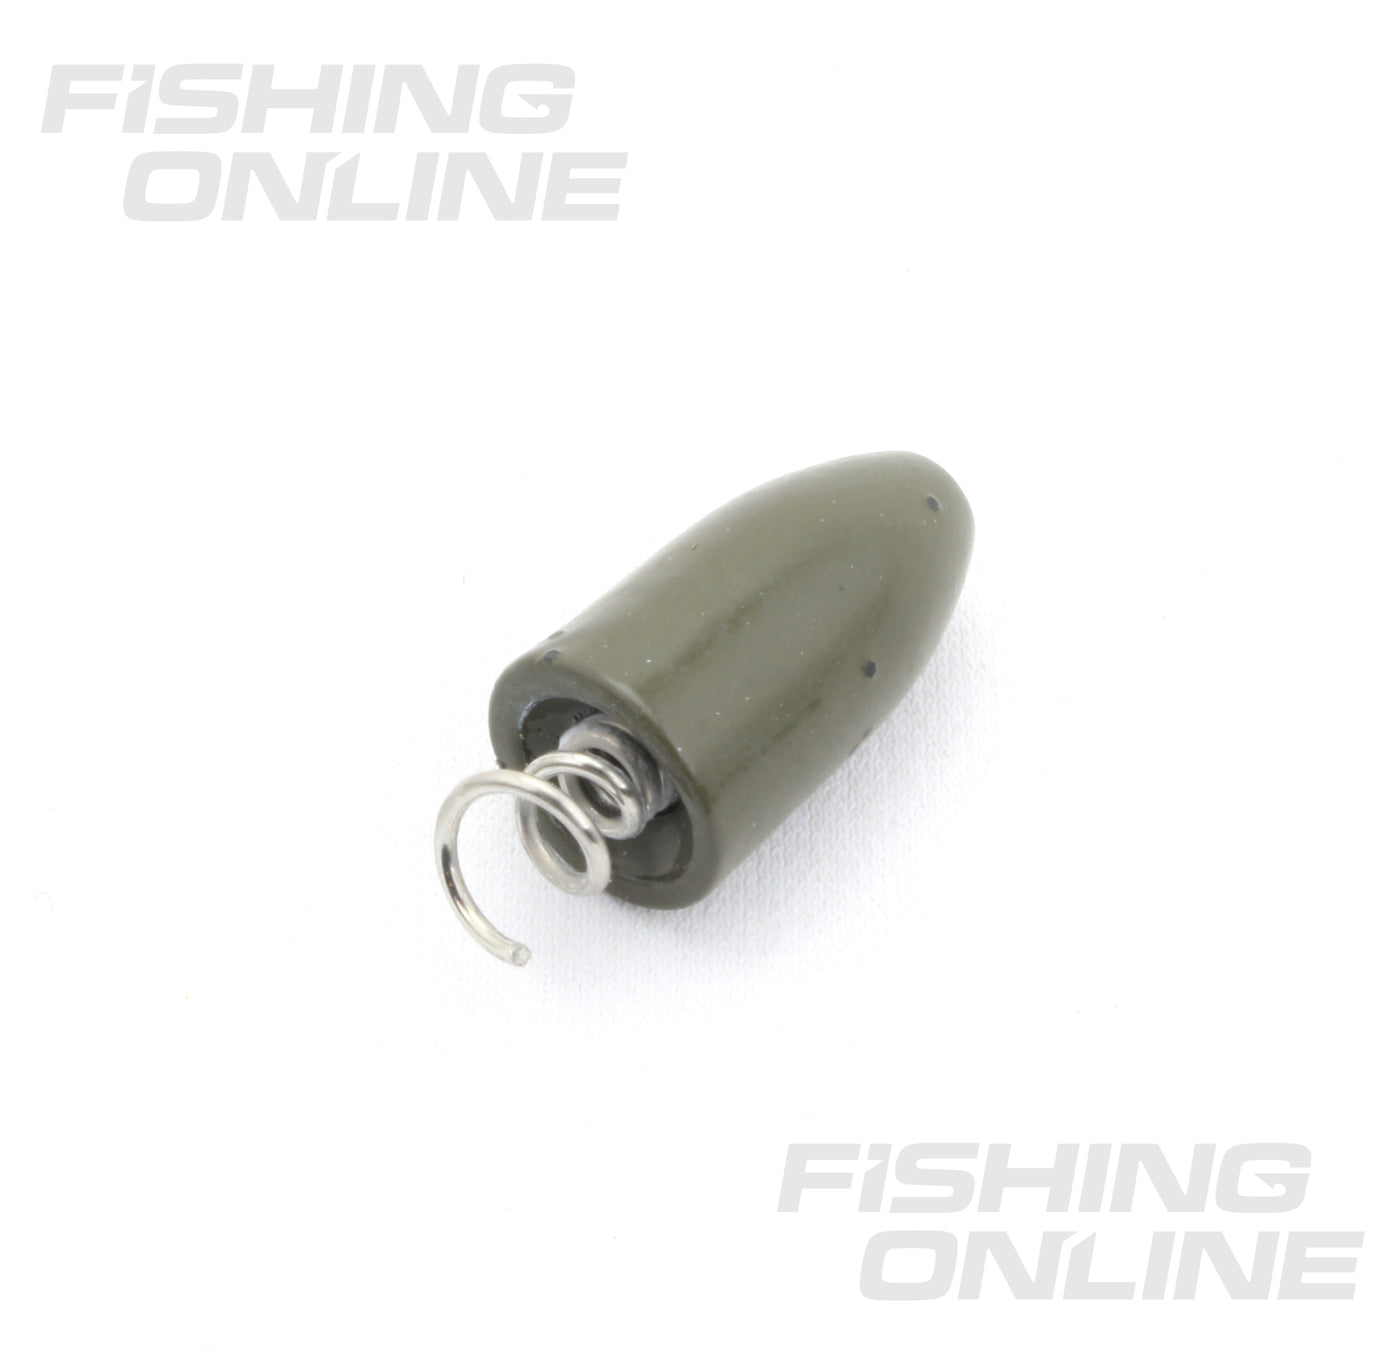 40 Walking Sinkers 1 1/4 Oz Fishing Weights Fast for sale online